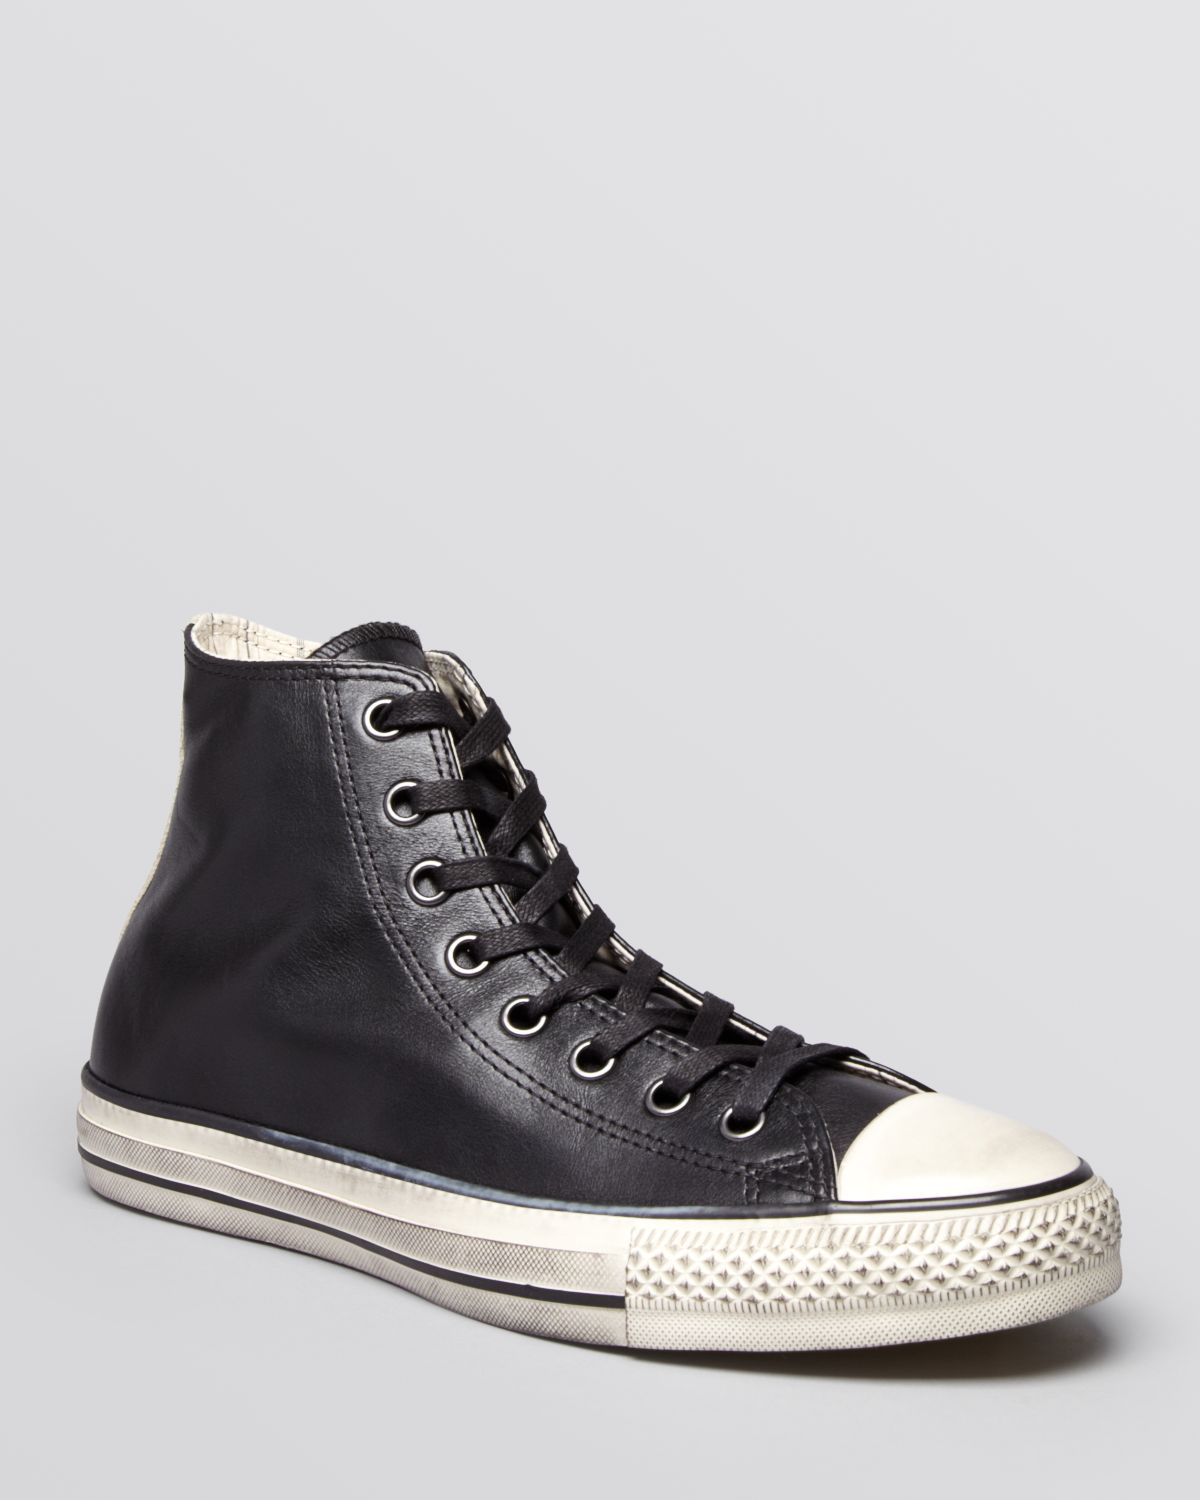 John Varvatos All Star Burnished Leather Chuck Taylor In